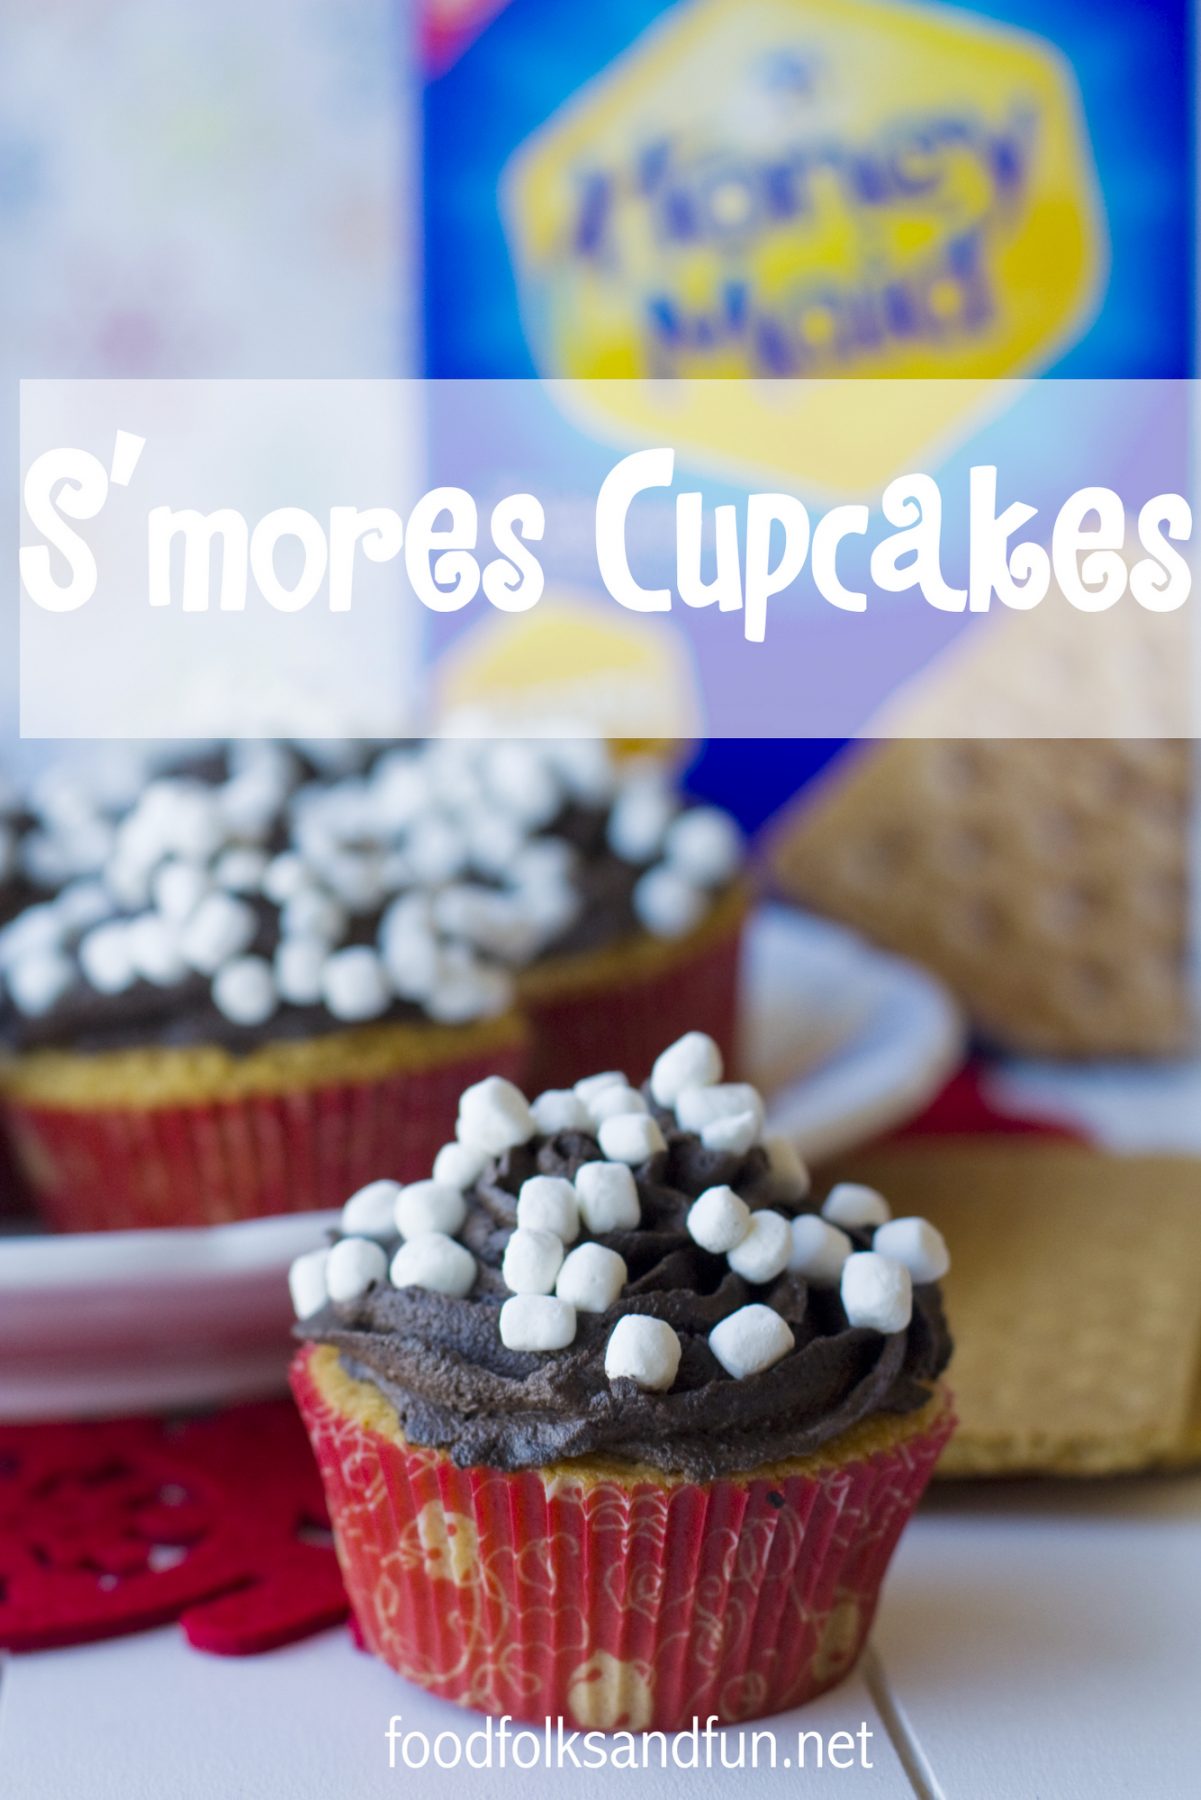 Graham cracker Smore Cupcakes Recipe with milk chocolate buttercream plus a tutorial on How to Make Holiday Graham Cracker Houses. via @foodfolksandfun